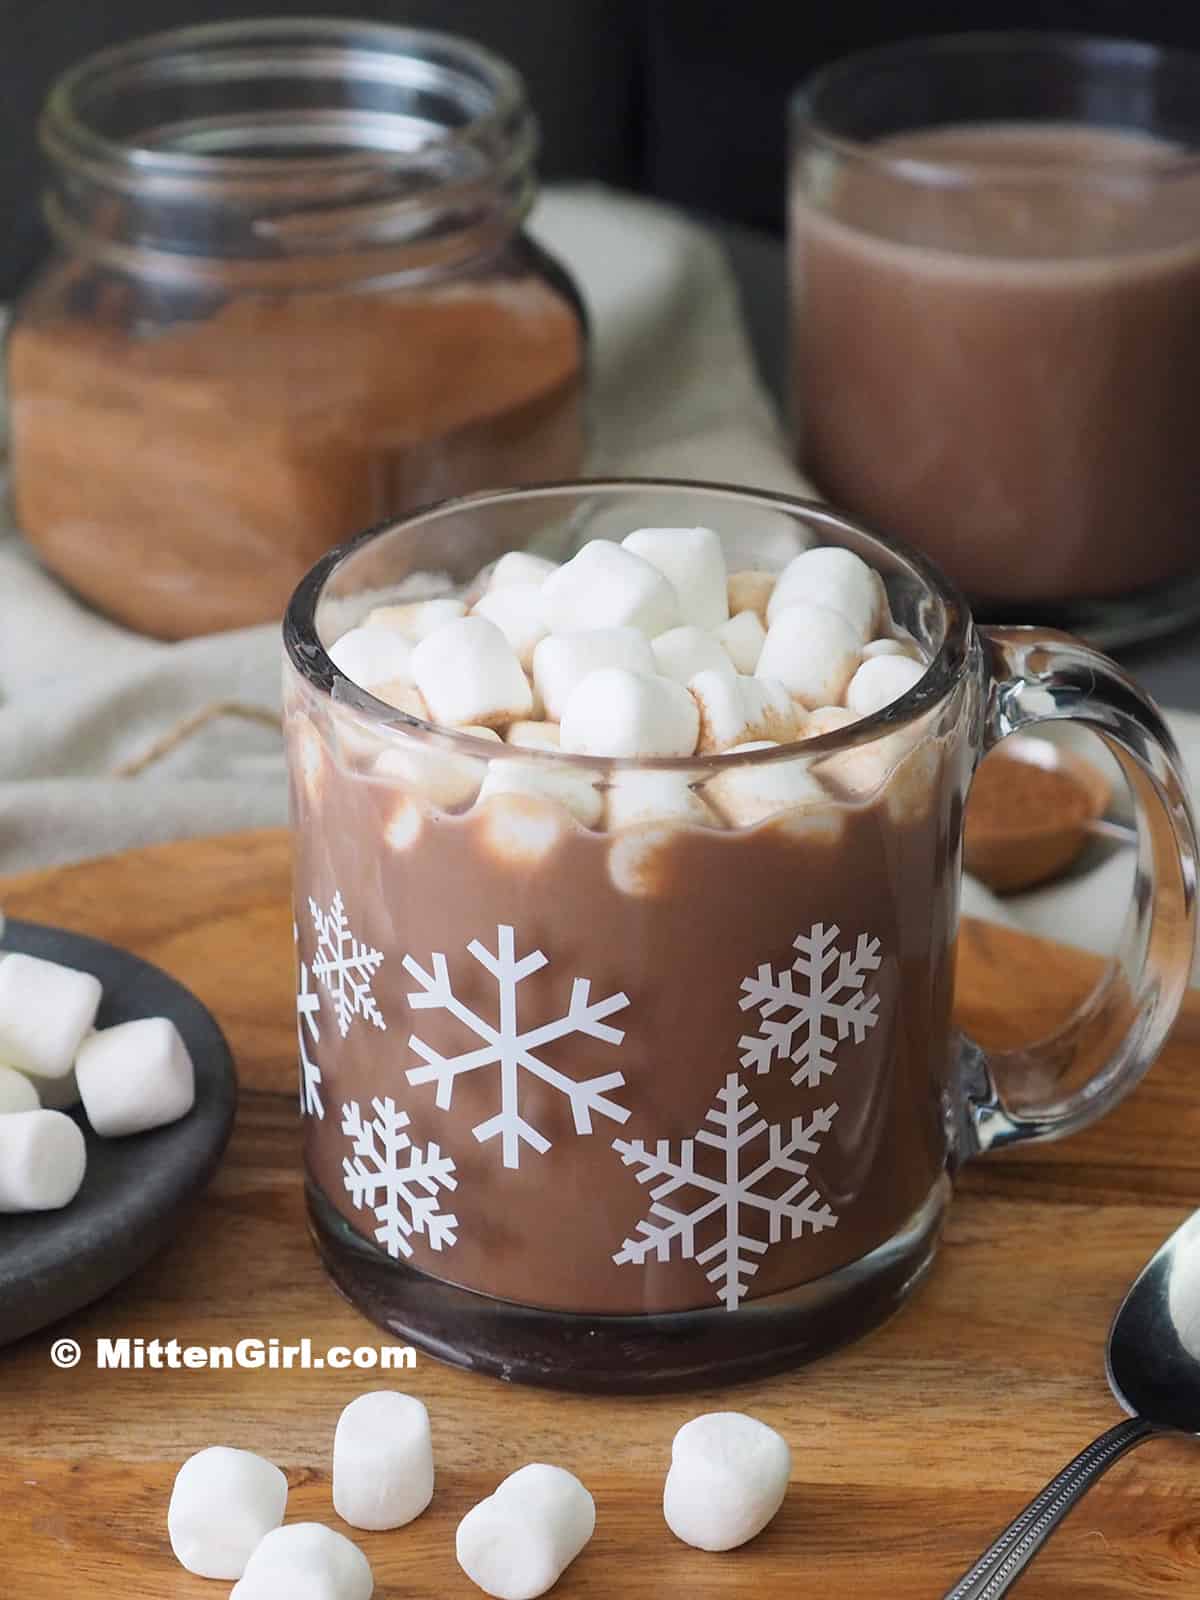 A mug of hot chocolate topped with lots of mini marshmallows.